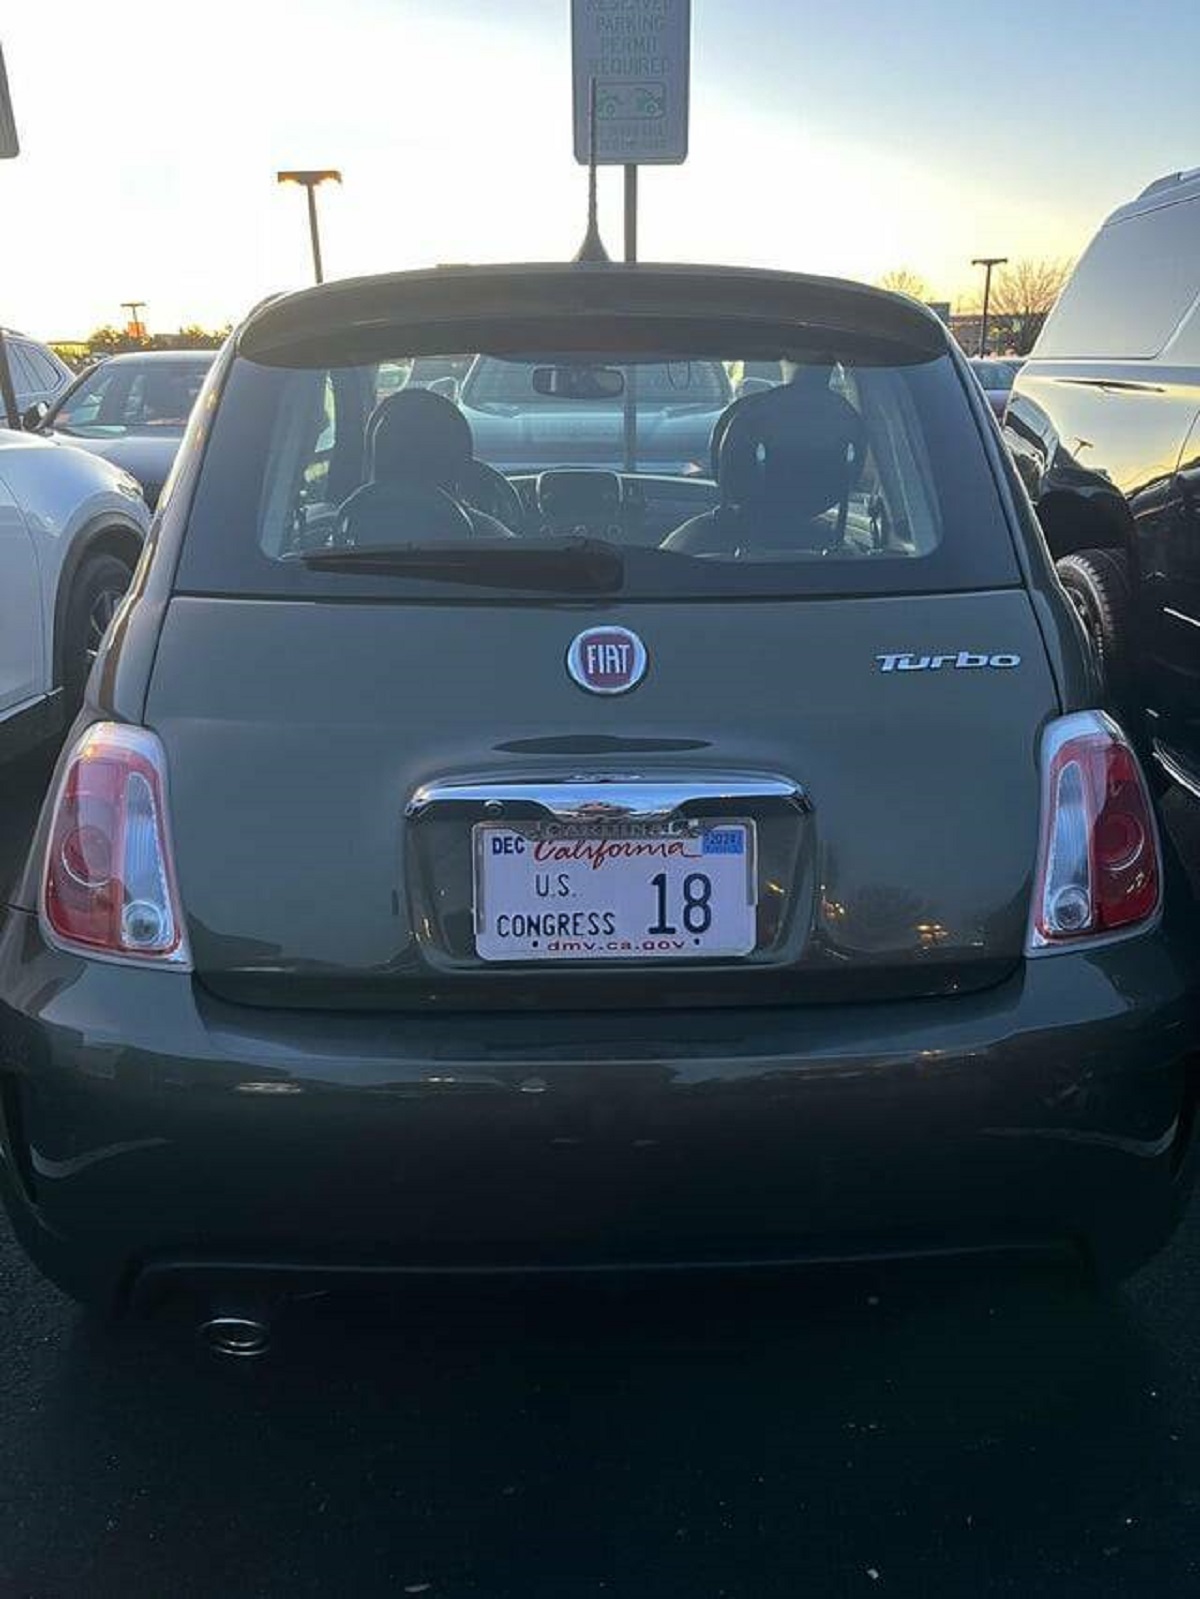 "Saw a fiat 500 with US Congress license plate parked at Washington Dulles Airport"